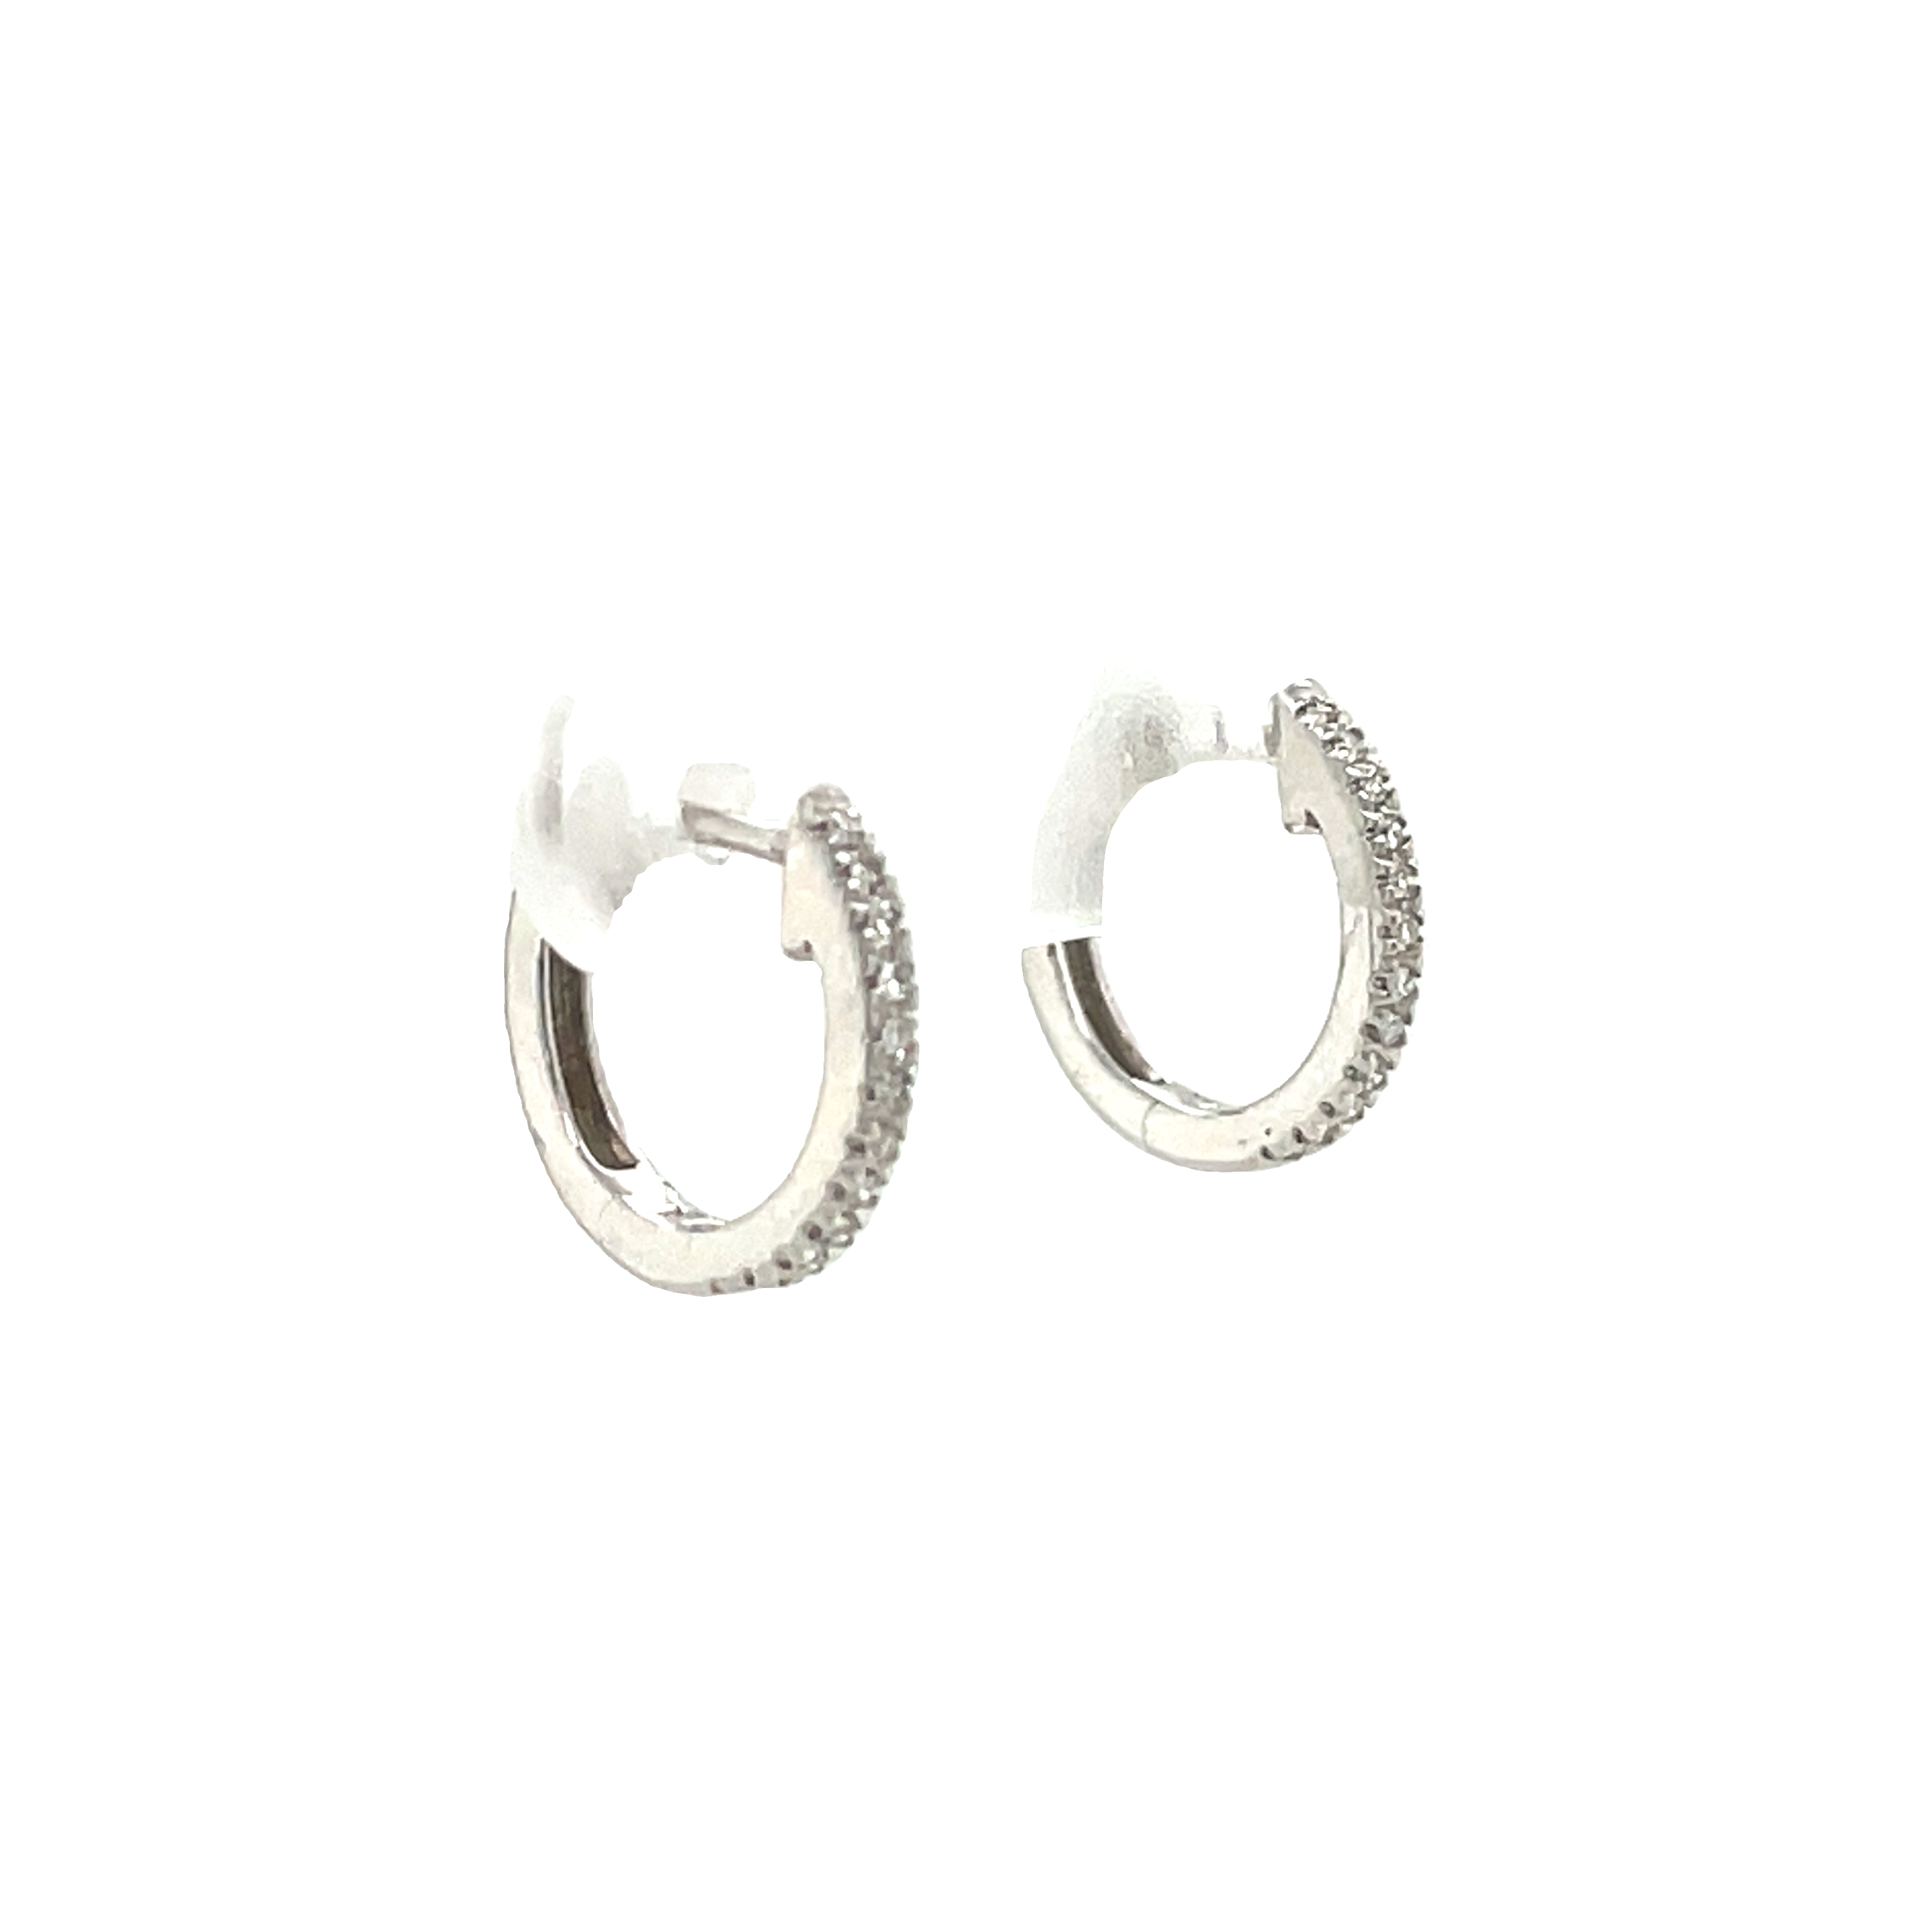 Luxurious 14k white gold encased with 0.20 cts of round diamonds. A secure hinged system ensures these earrings are as easy to wear as they are beautiful!